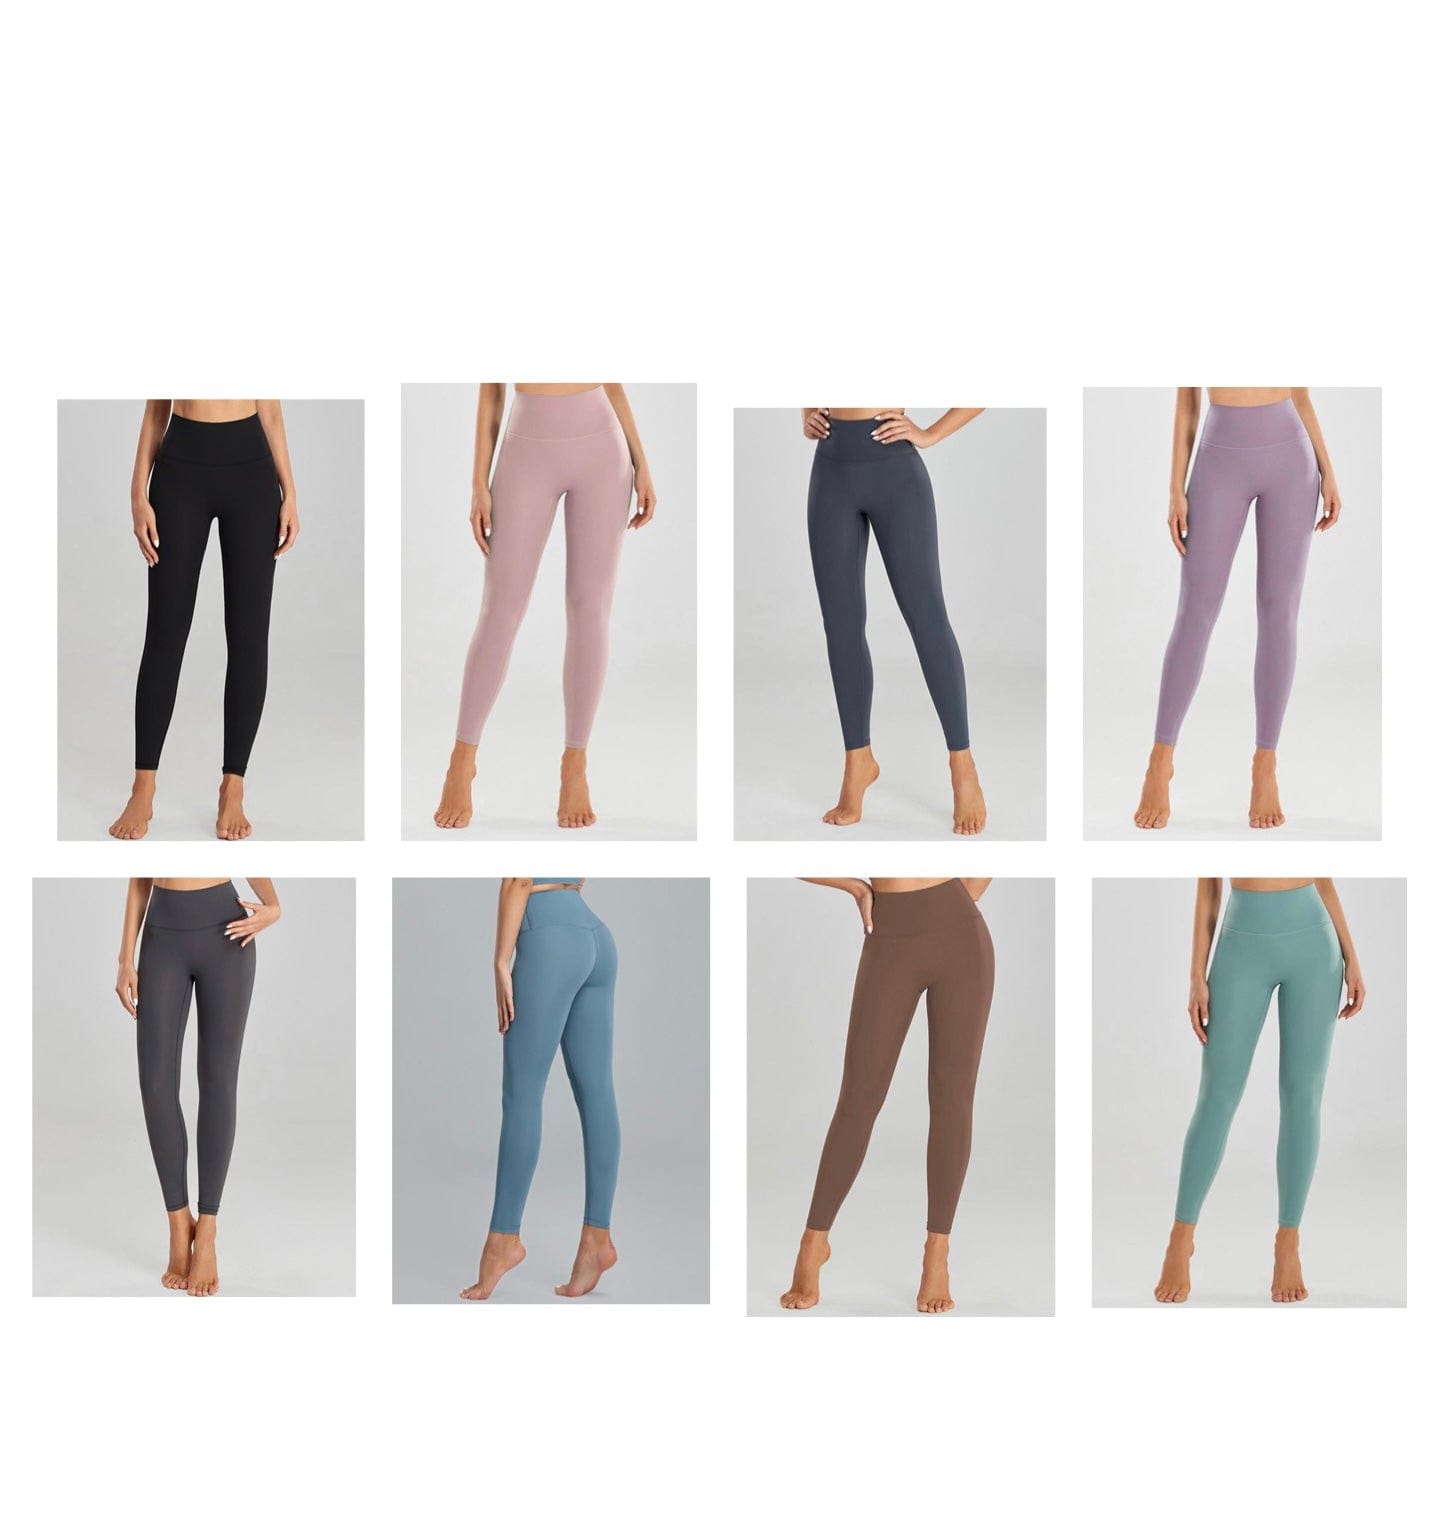 Everyday/ Curves seamless high compression leggings (sizing up to 3XL)